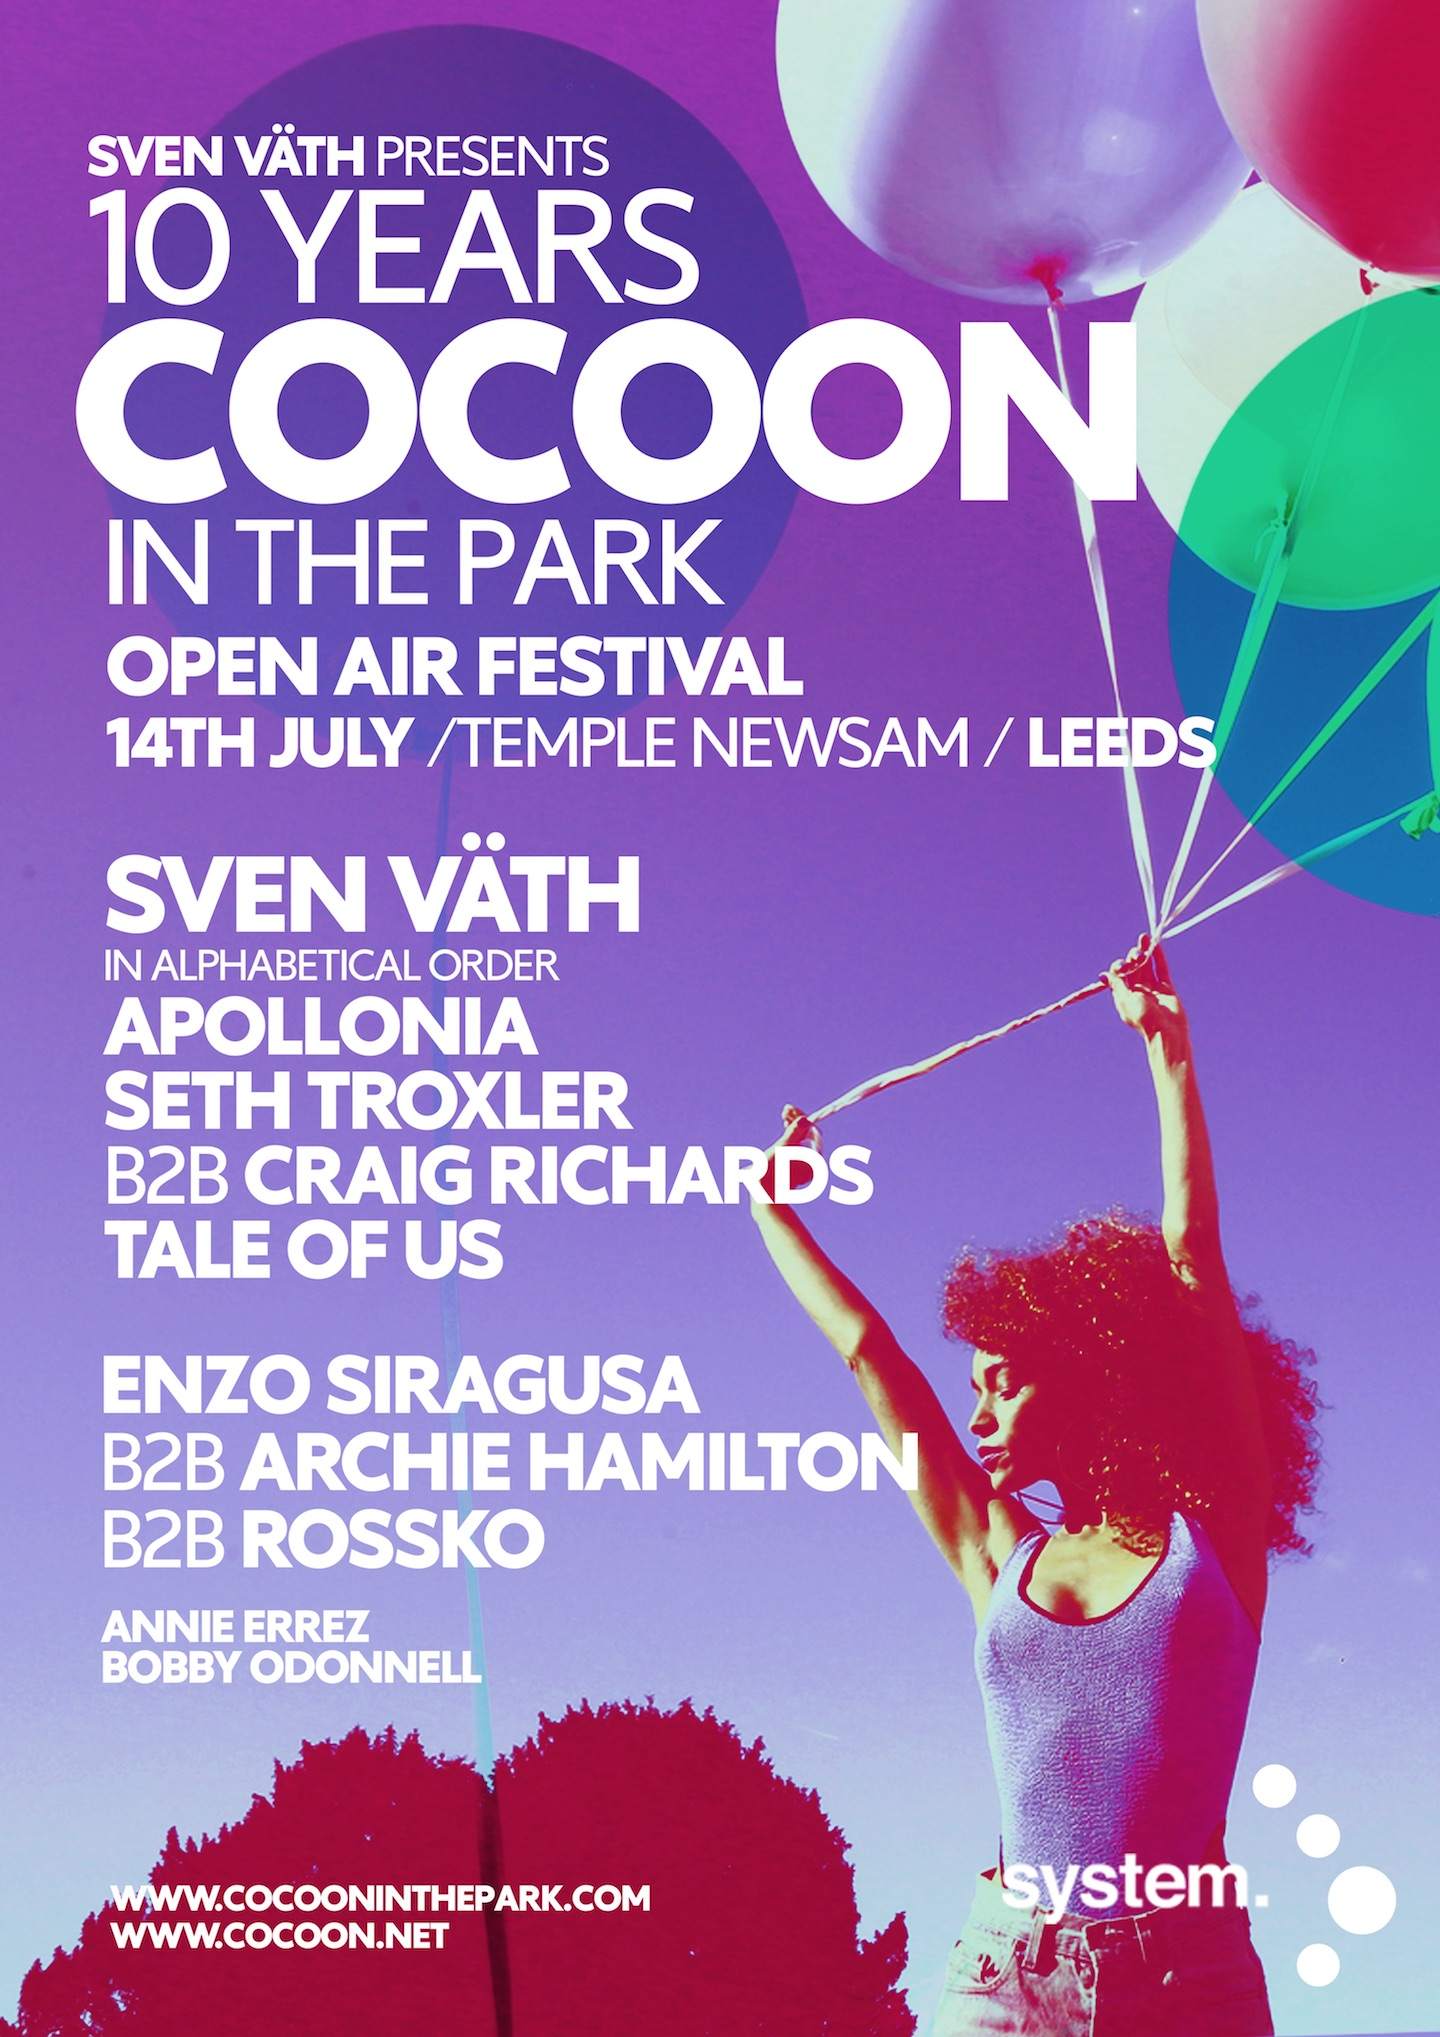 Cocoon In The Park turns ten in 2018 with Sven Väth, Tale Of Us image